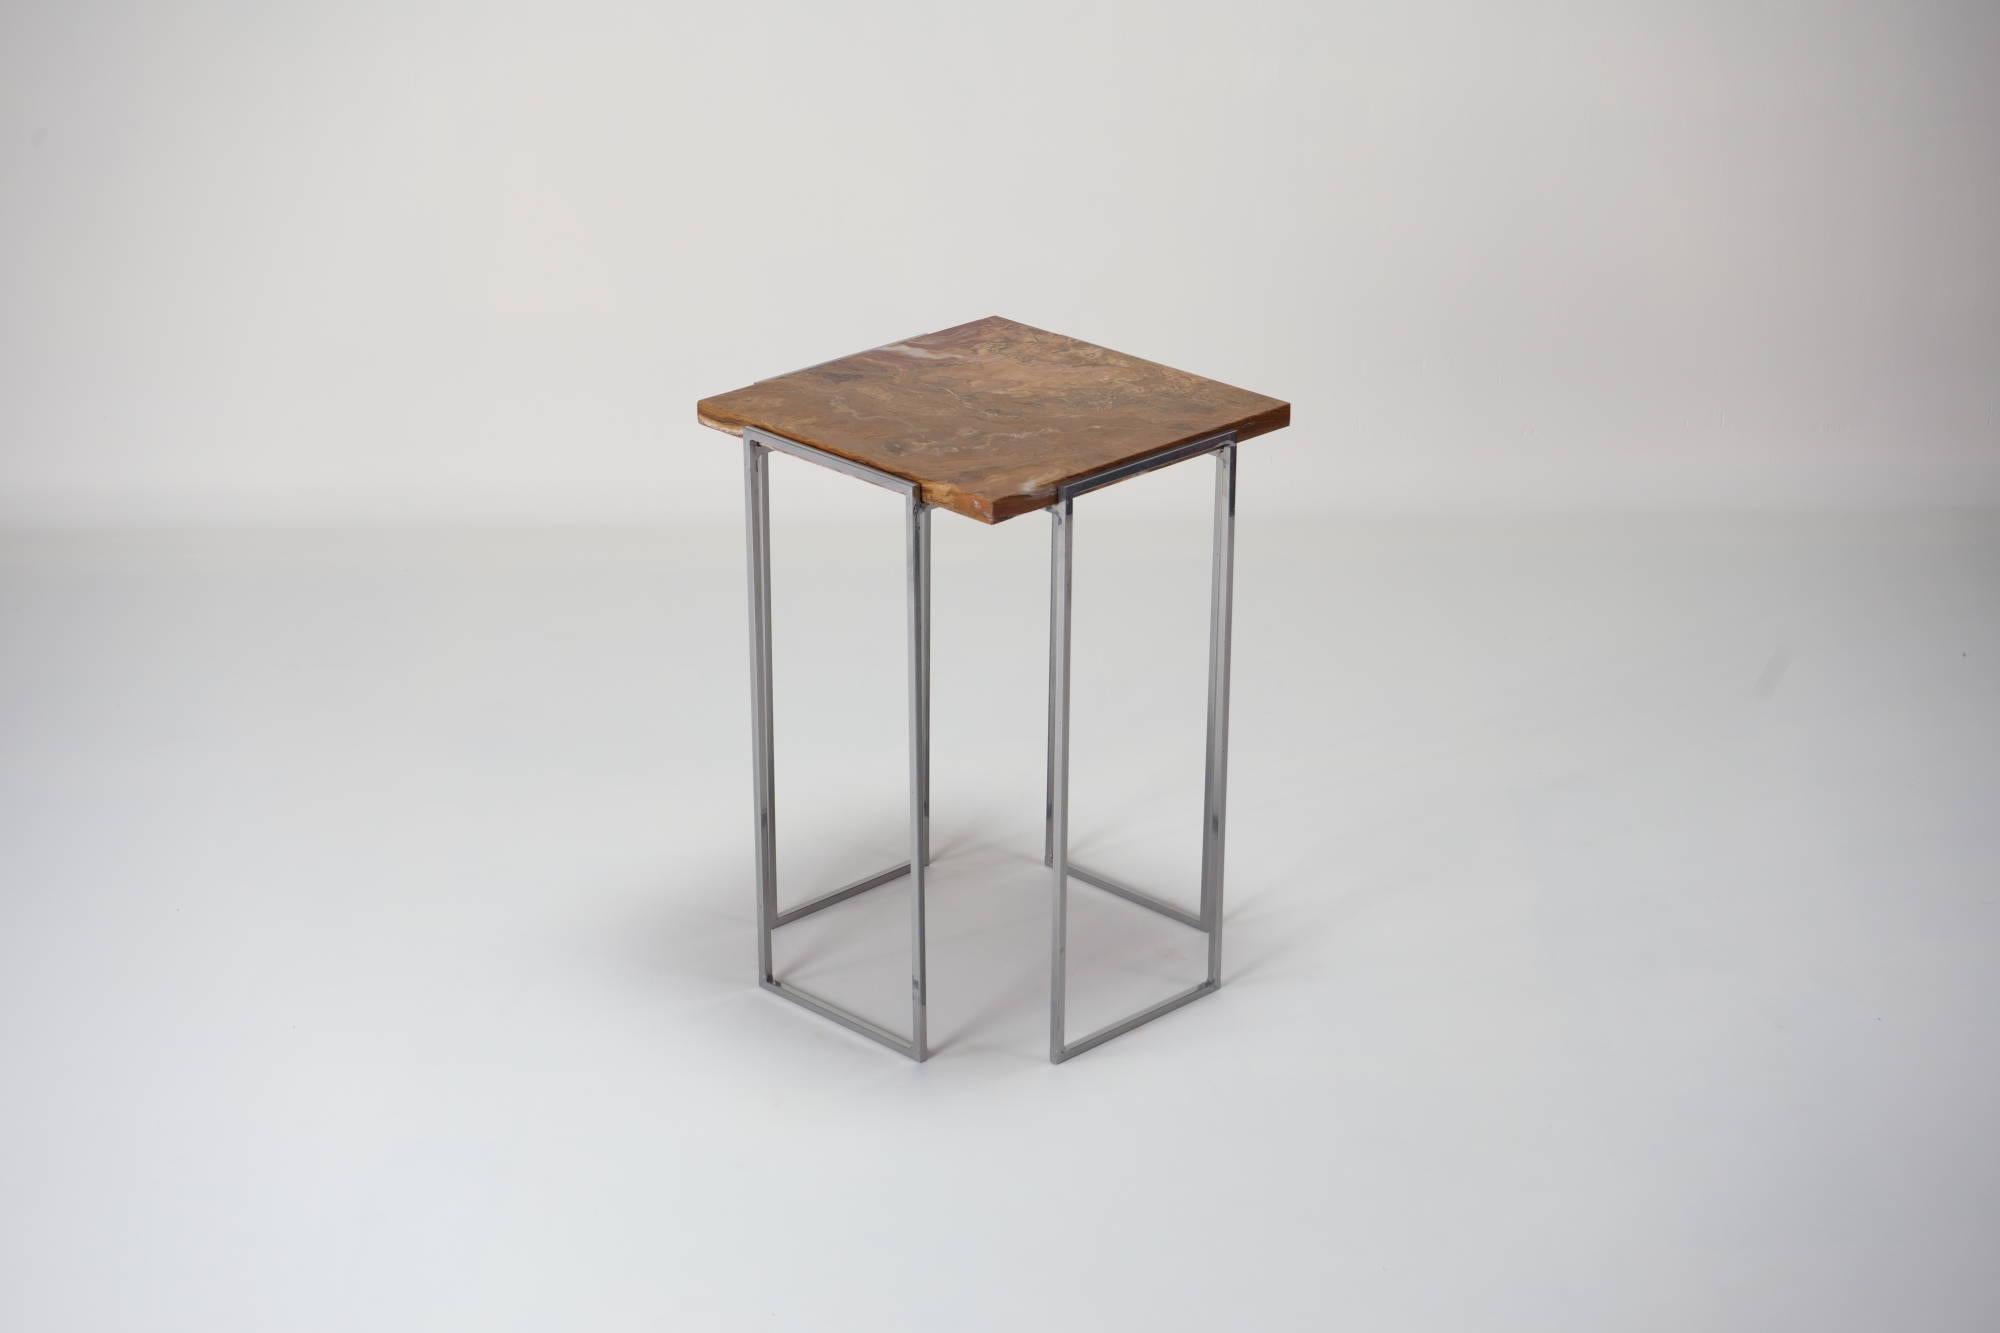 Modern Kaus Cromo, Persian Onyx Side Table By DFdesignlab Handmade in Italy For Sale